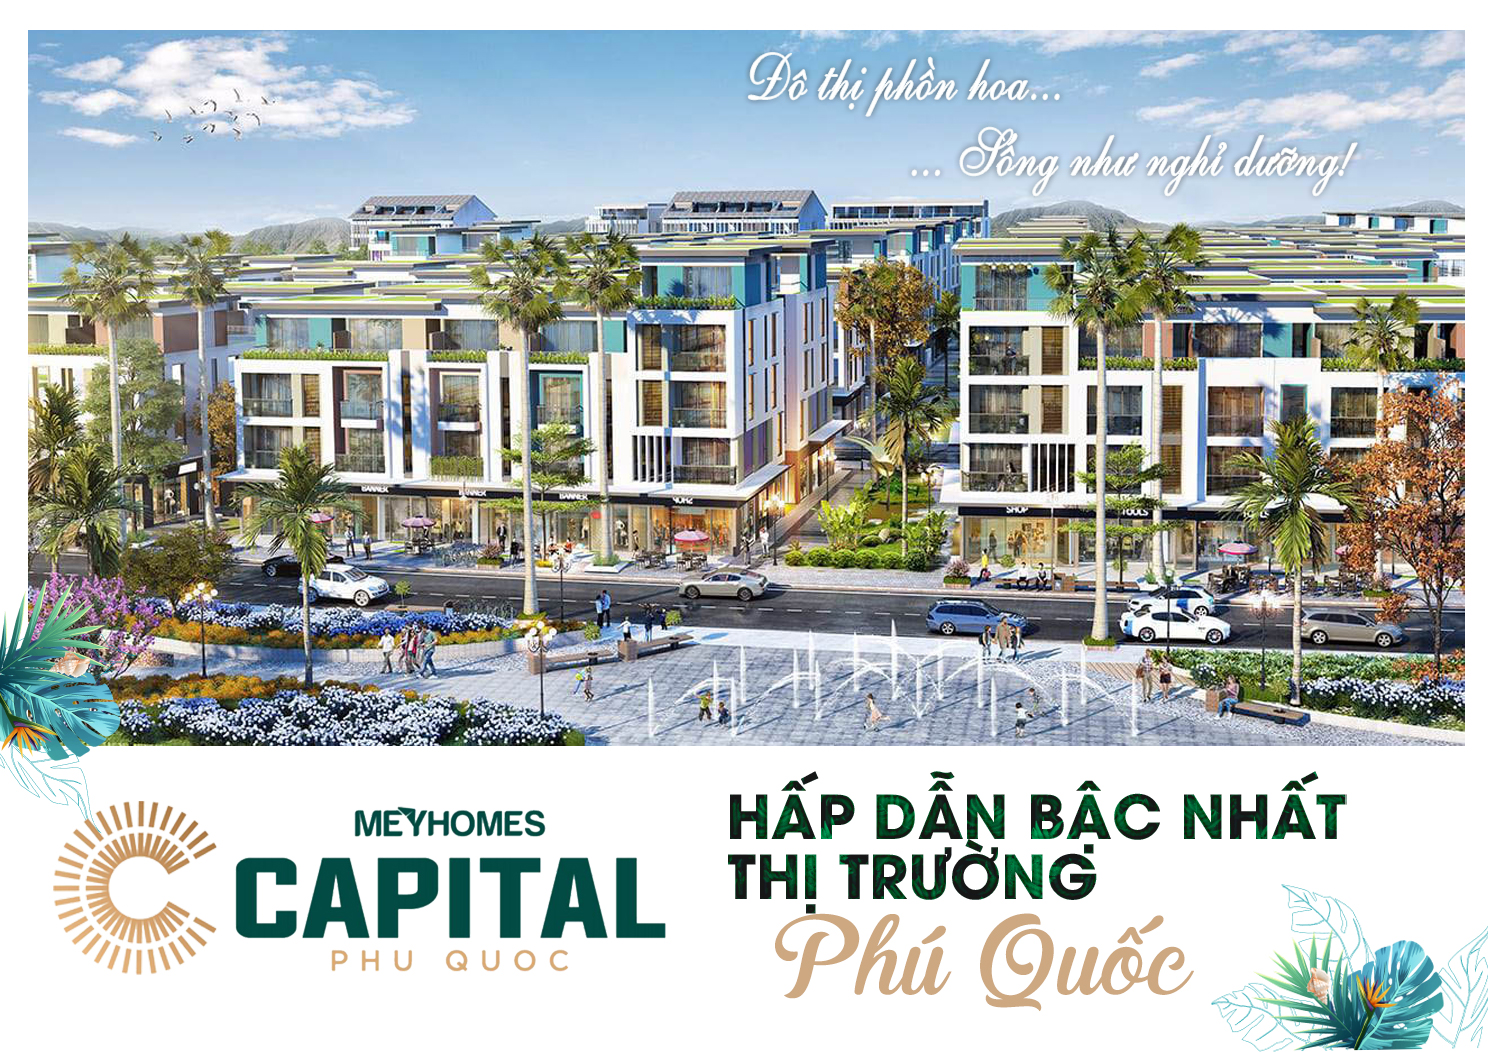 Meyhomes Capital Phu Quoc urban area is invested and developed by Meyland